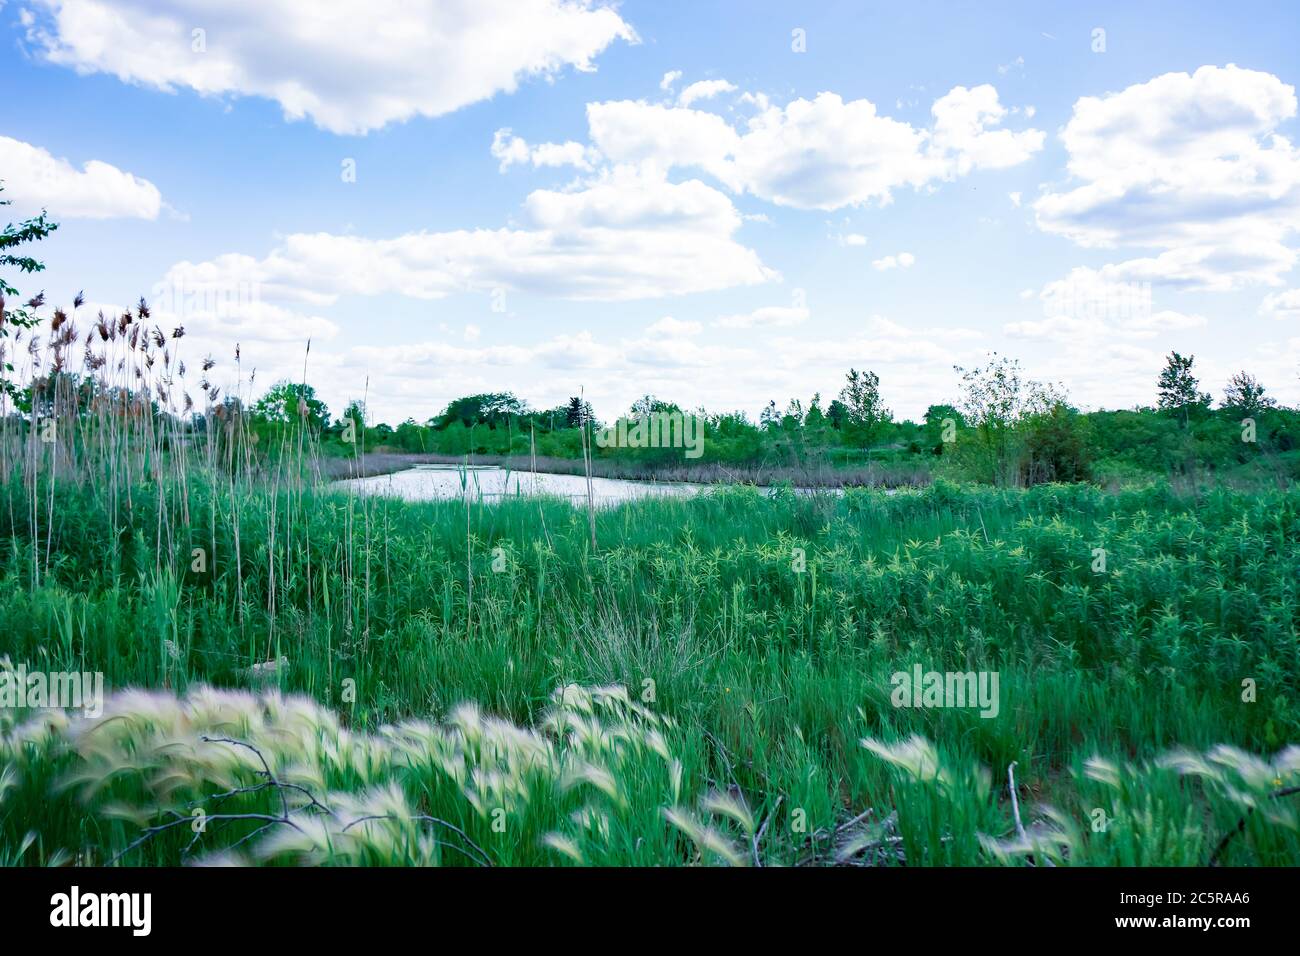 Field of various lush green prairie grass surrounding a small pond on a partly cloudy day. Stock Photo